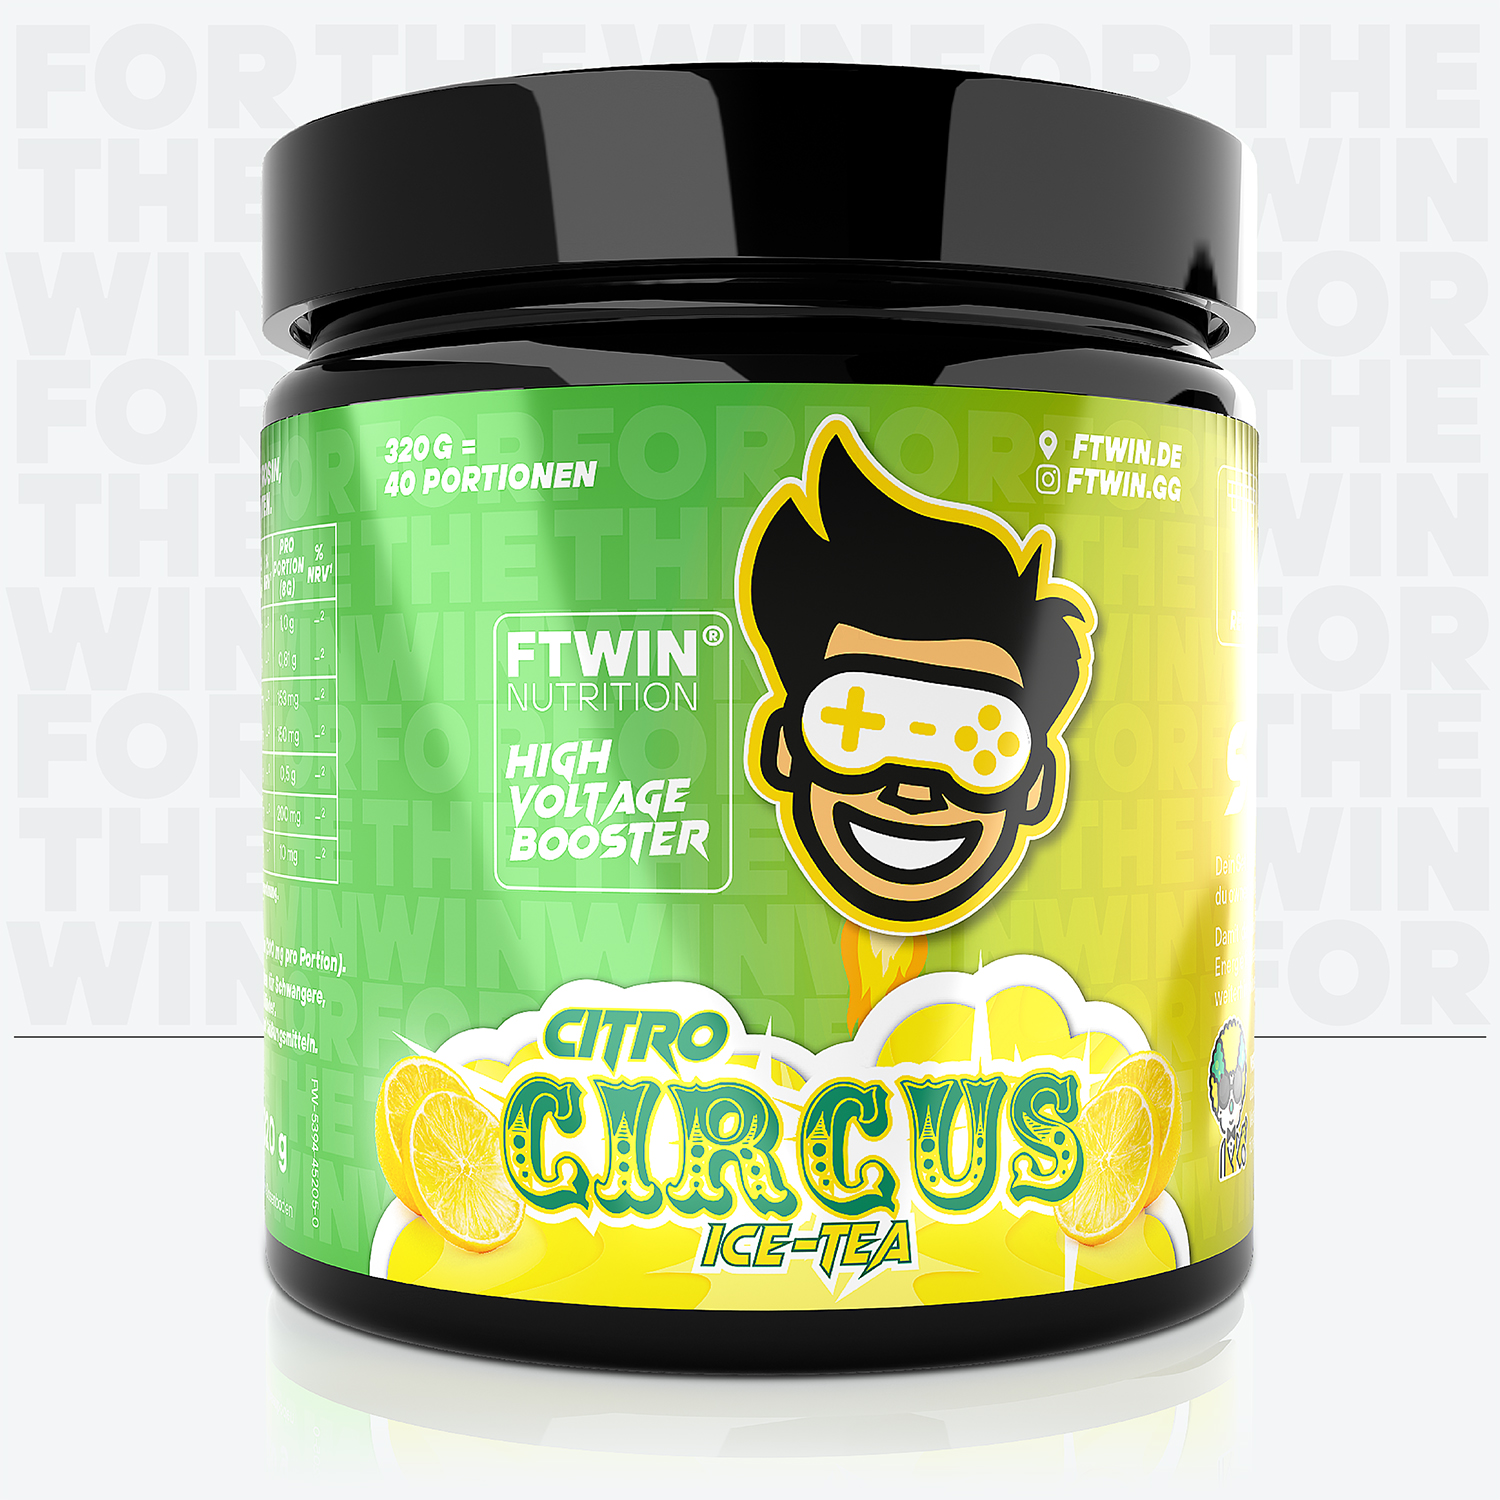 FTWIN High Voltage Gaming Booster – Citro Circus Flavour